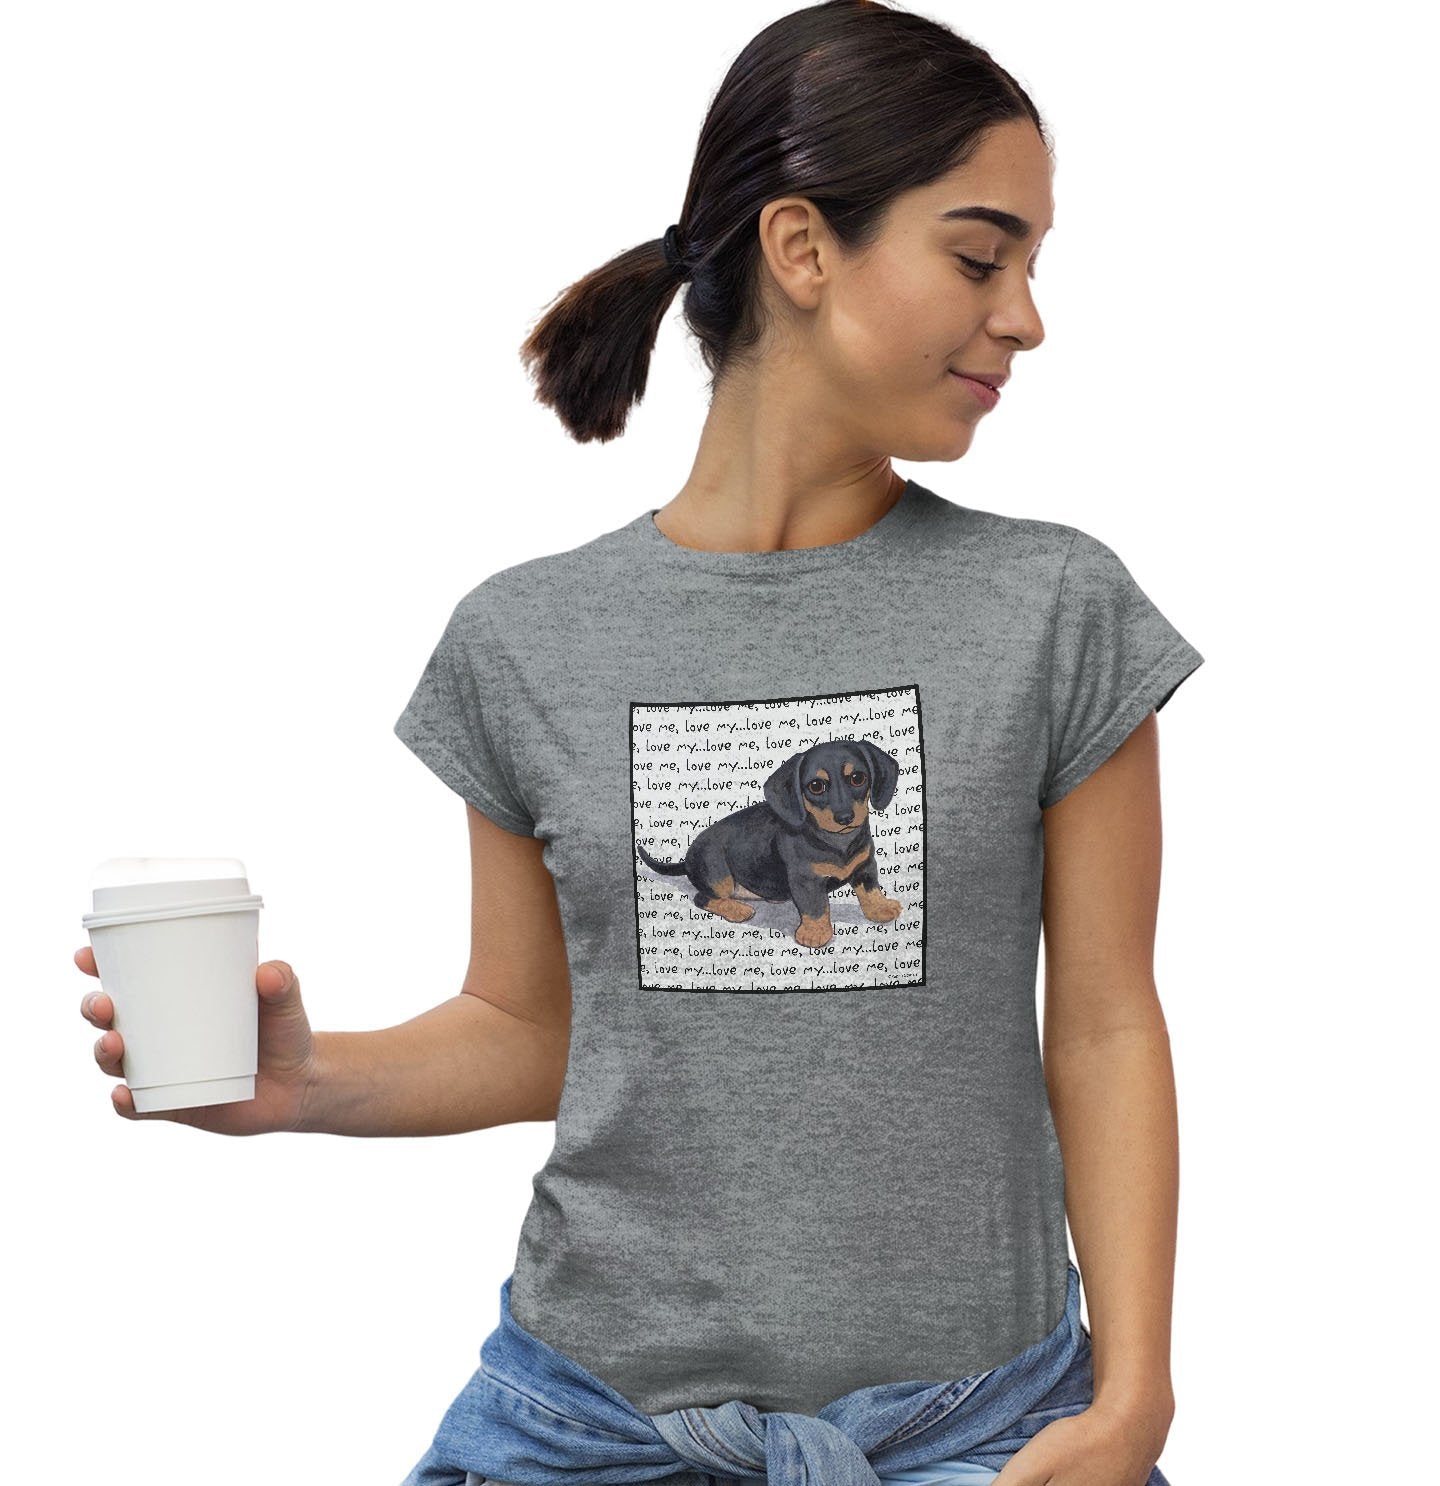 Dachshund Puppy Love Text - Women's Fitted T-Shirt